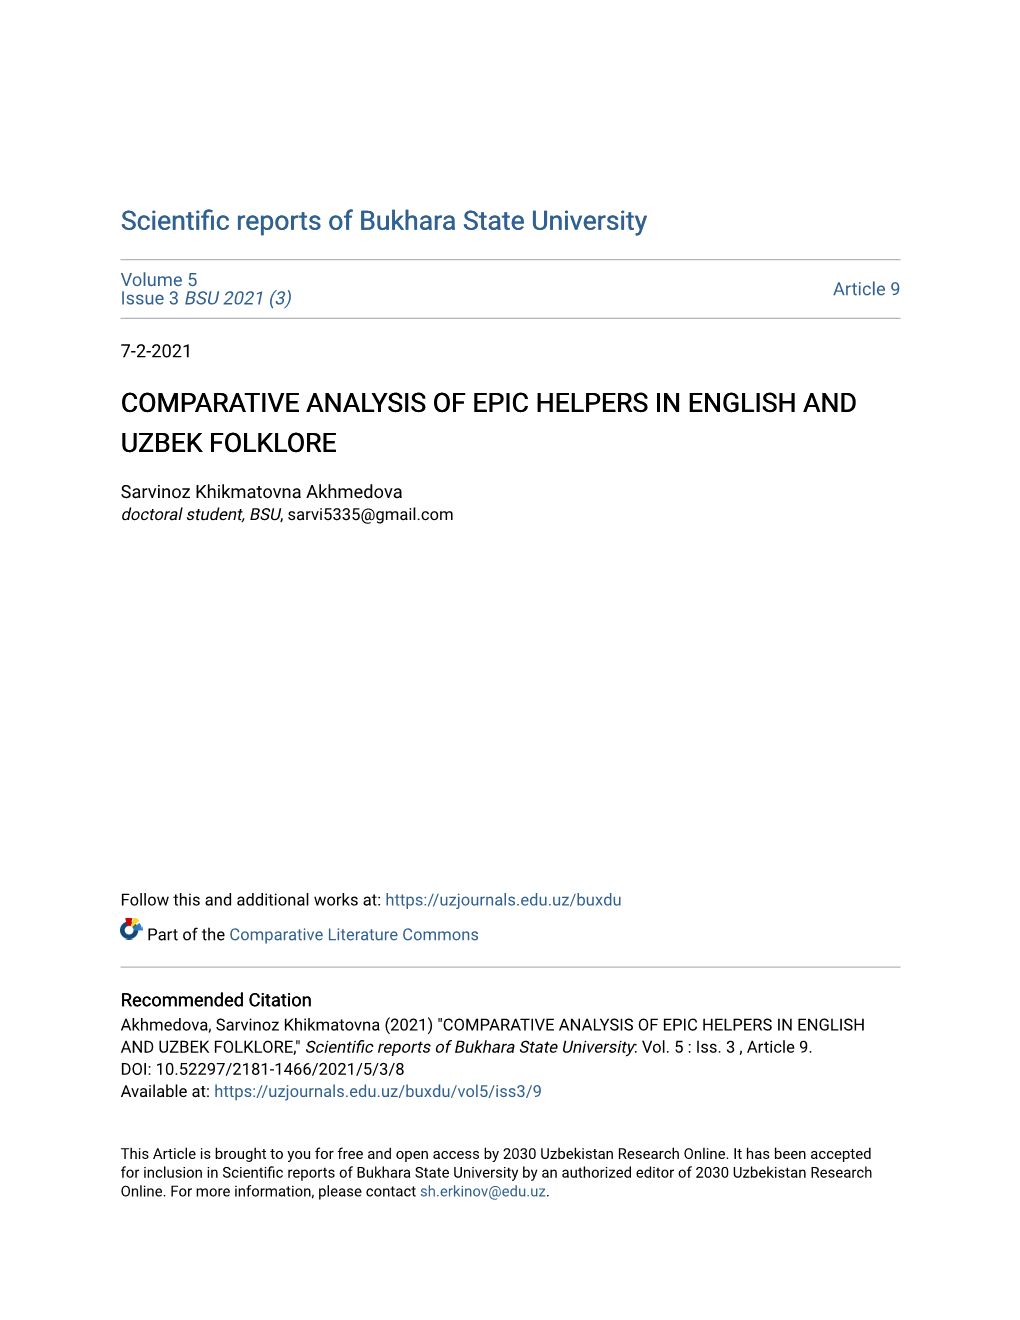 Comparative Analysis of Epic Helpers in English and Uzbek Folklore